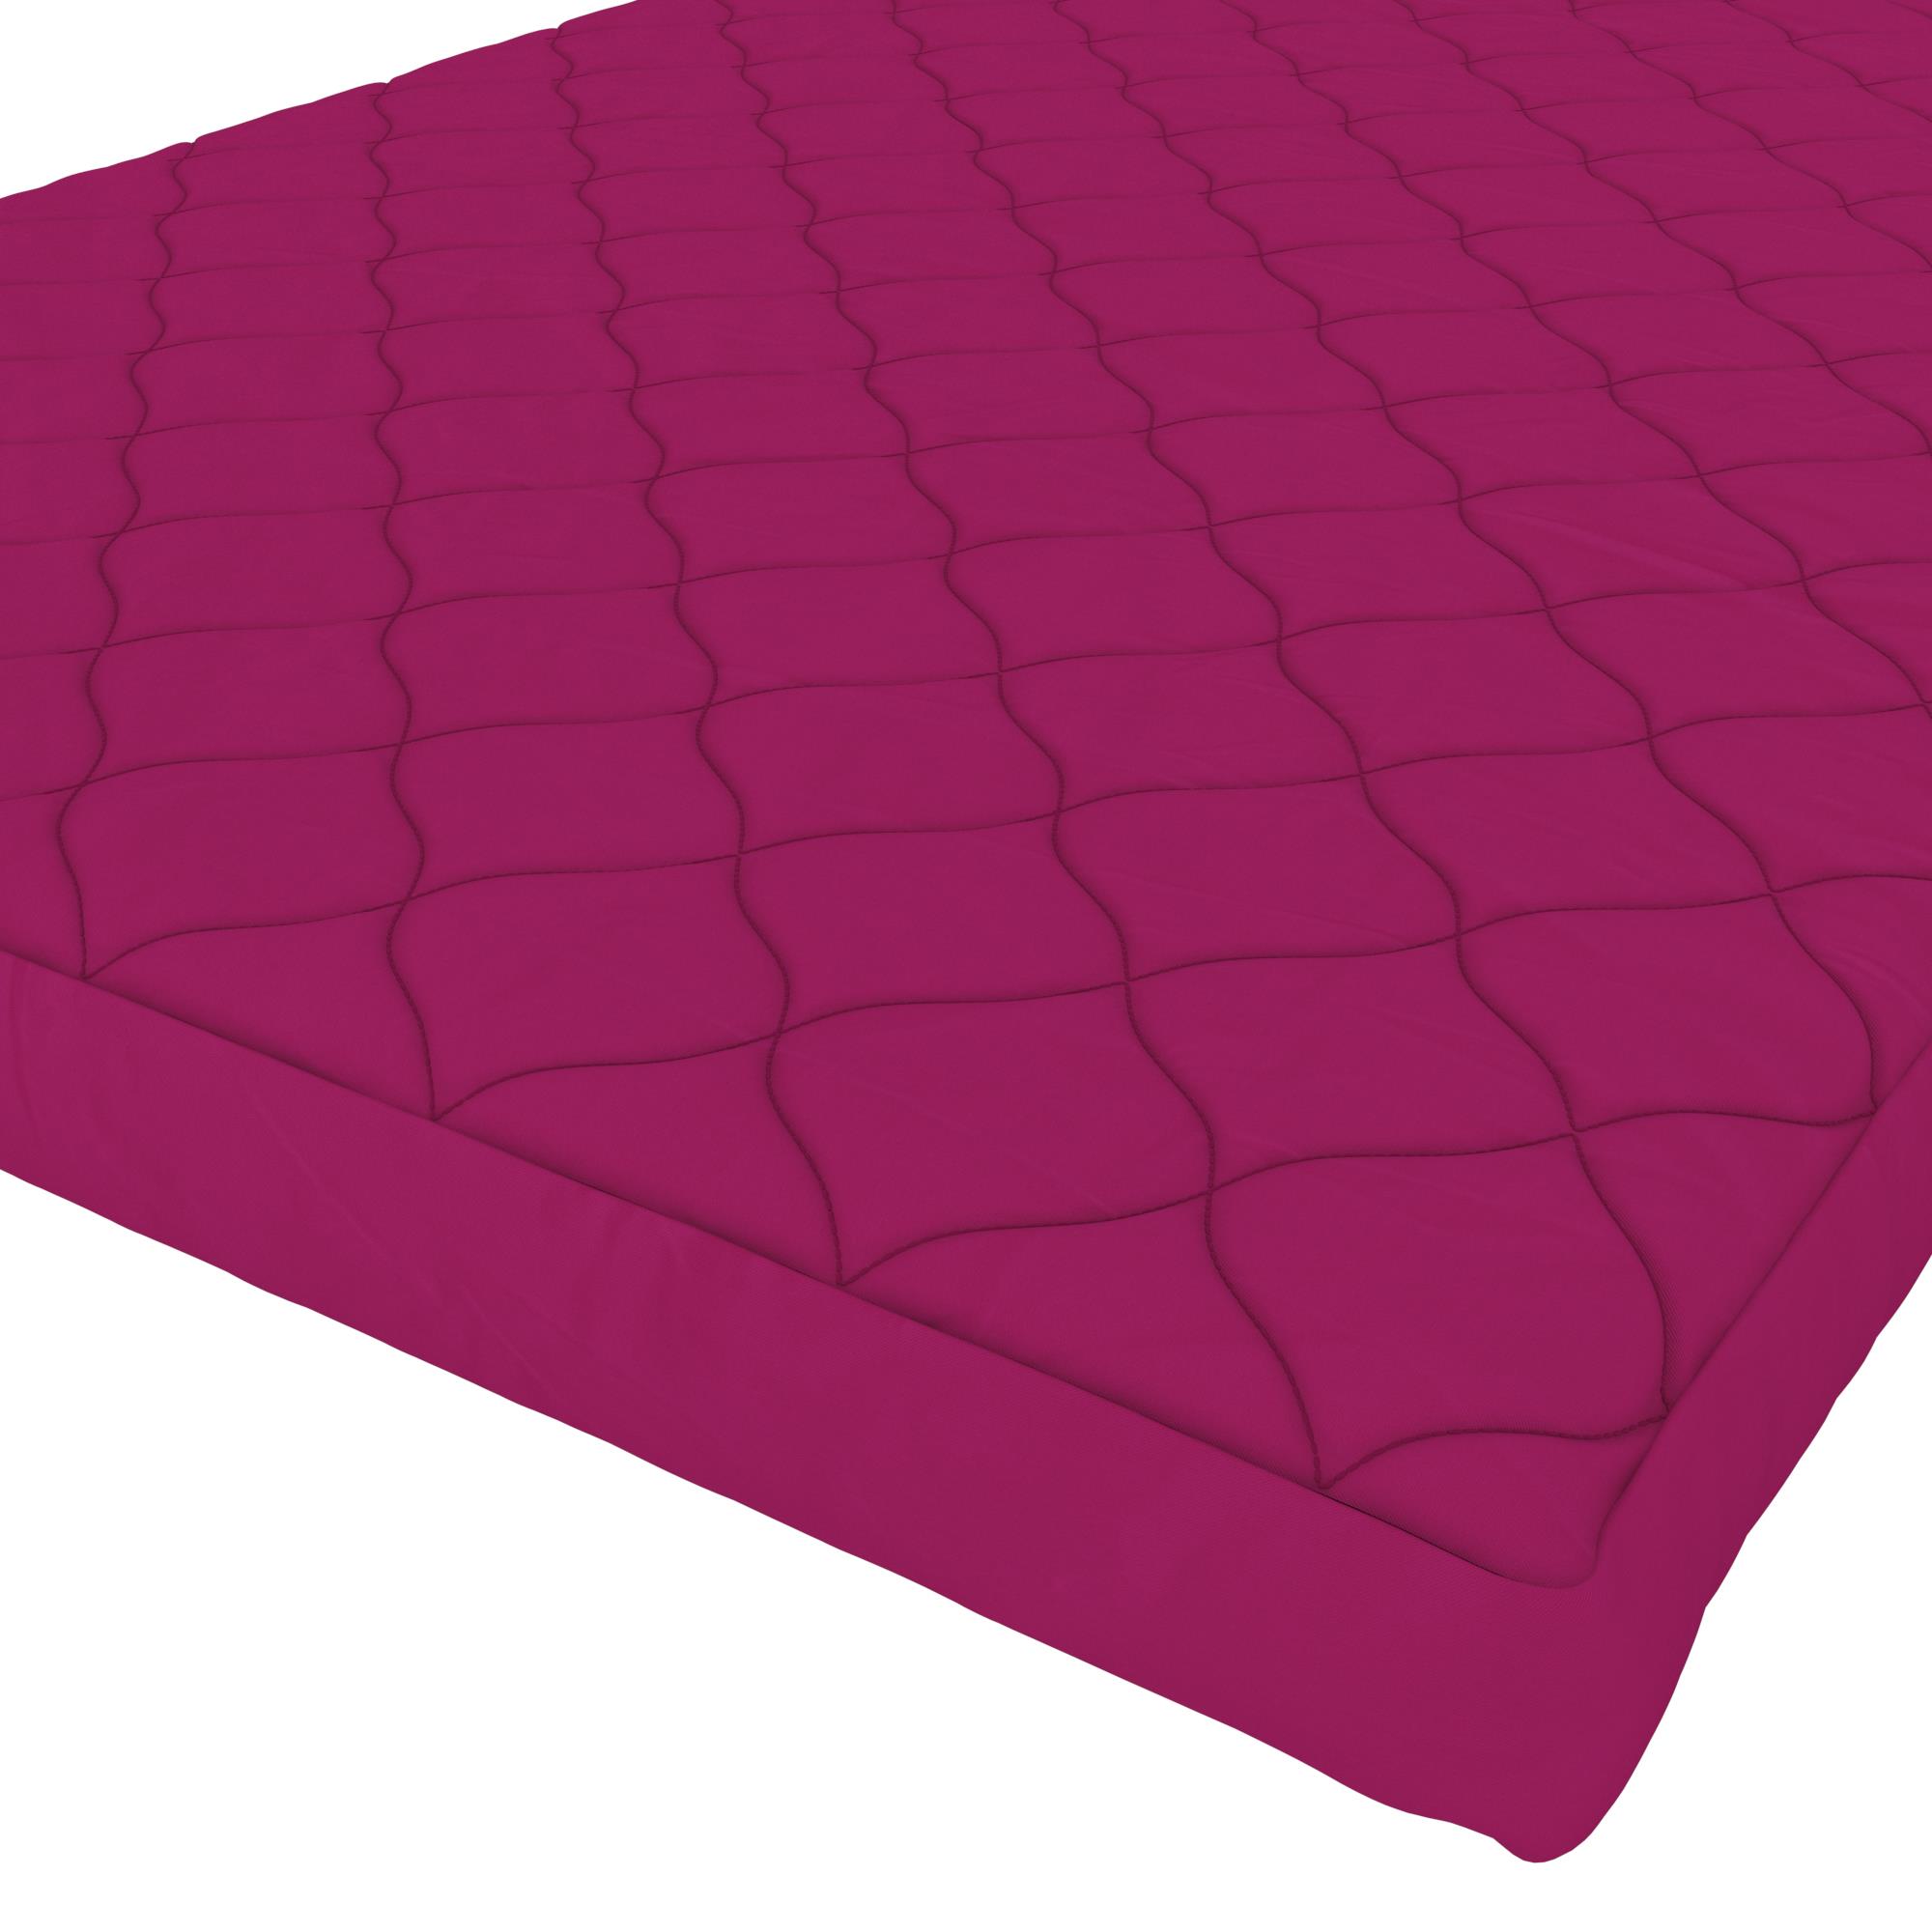 DHP Value 6 Inch Thermobonded Polyester Filled Quilted Top Bunk Bed Mattress, Full, Pink - image 5 of 9